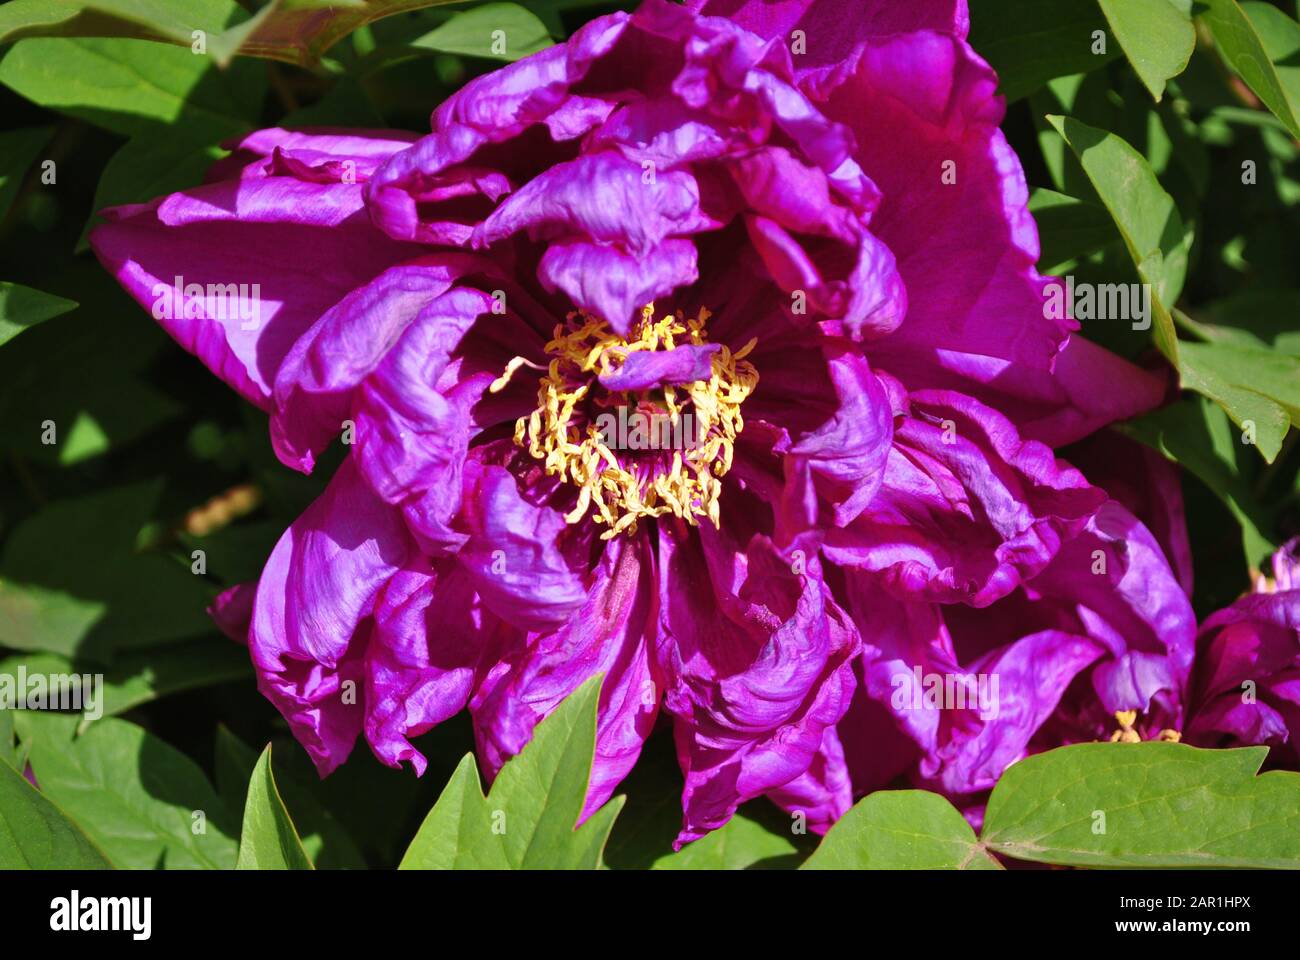 Bright purple peony flowers, close up detail, soft green blurry leaves background Stock Photo